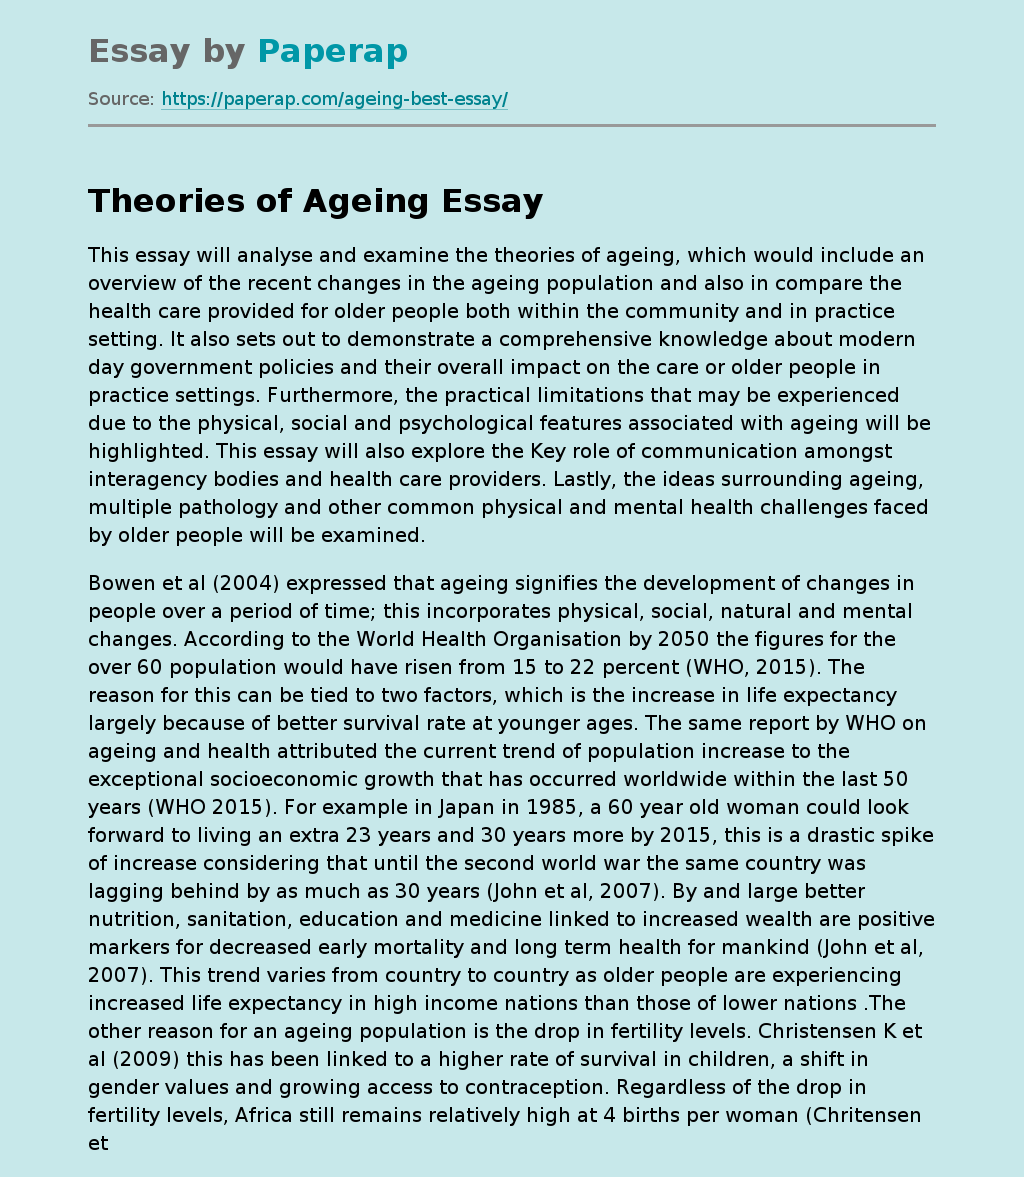 Theories of Ageing